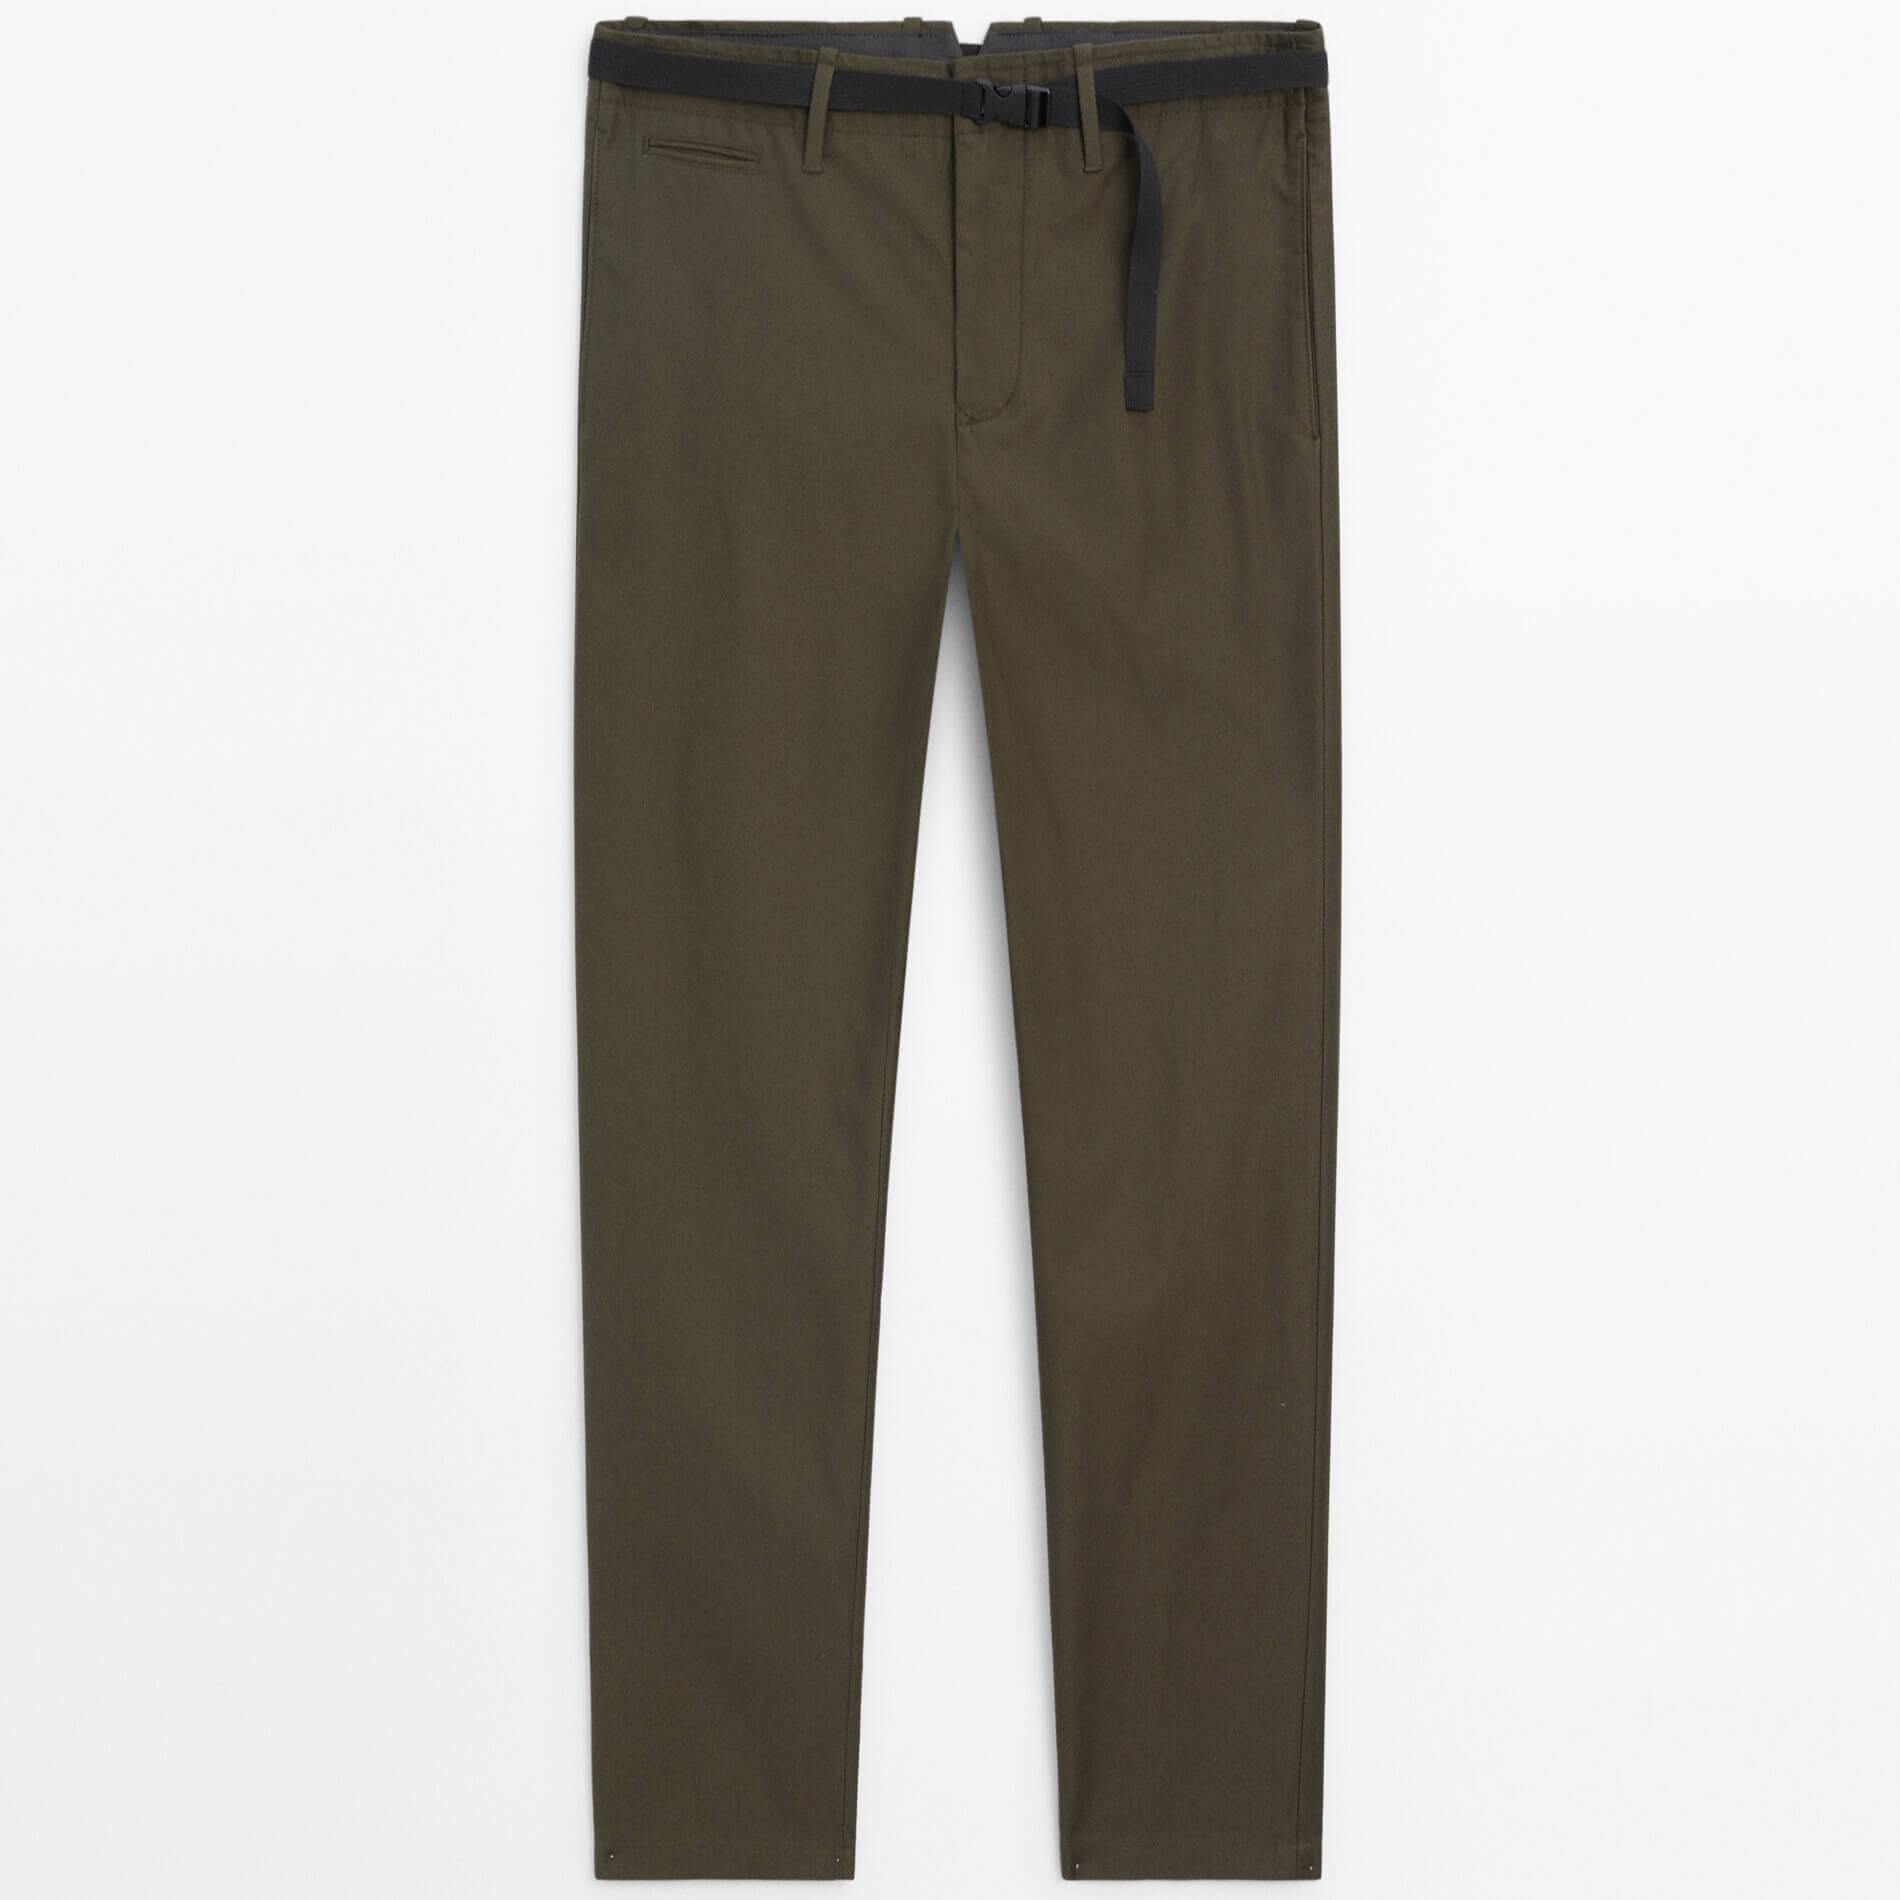 Брюки Massimo Dutti Relaxed Fit Belted Chino, хаки